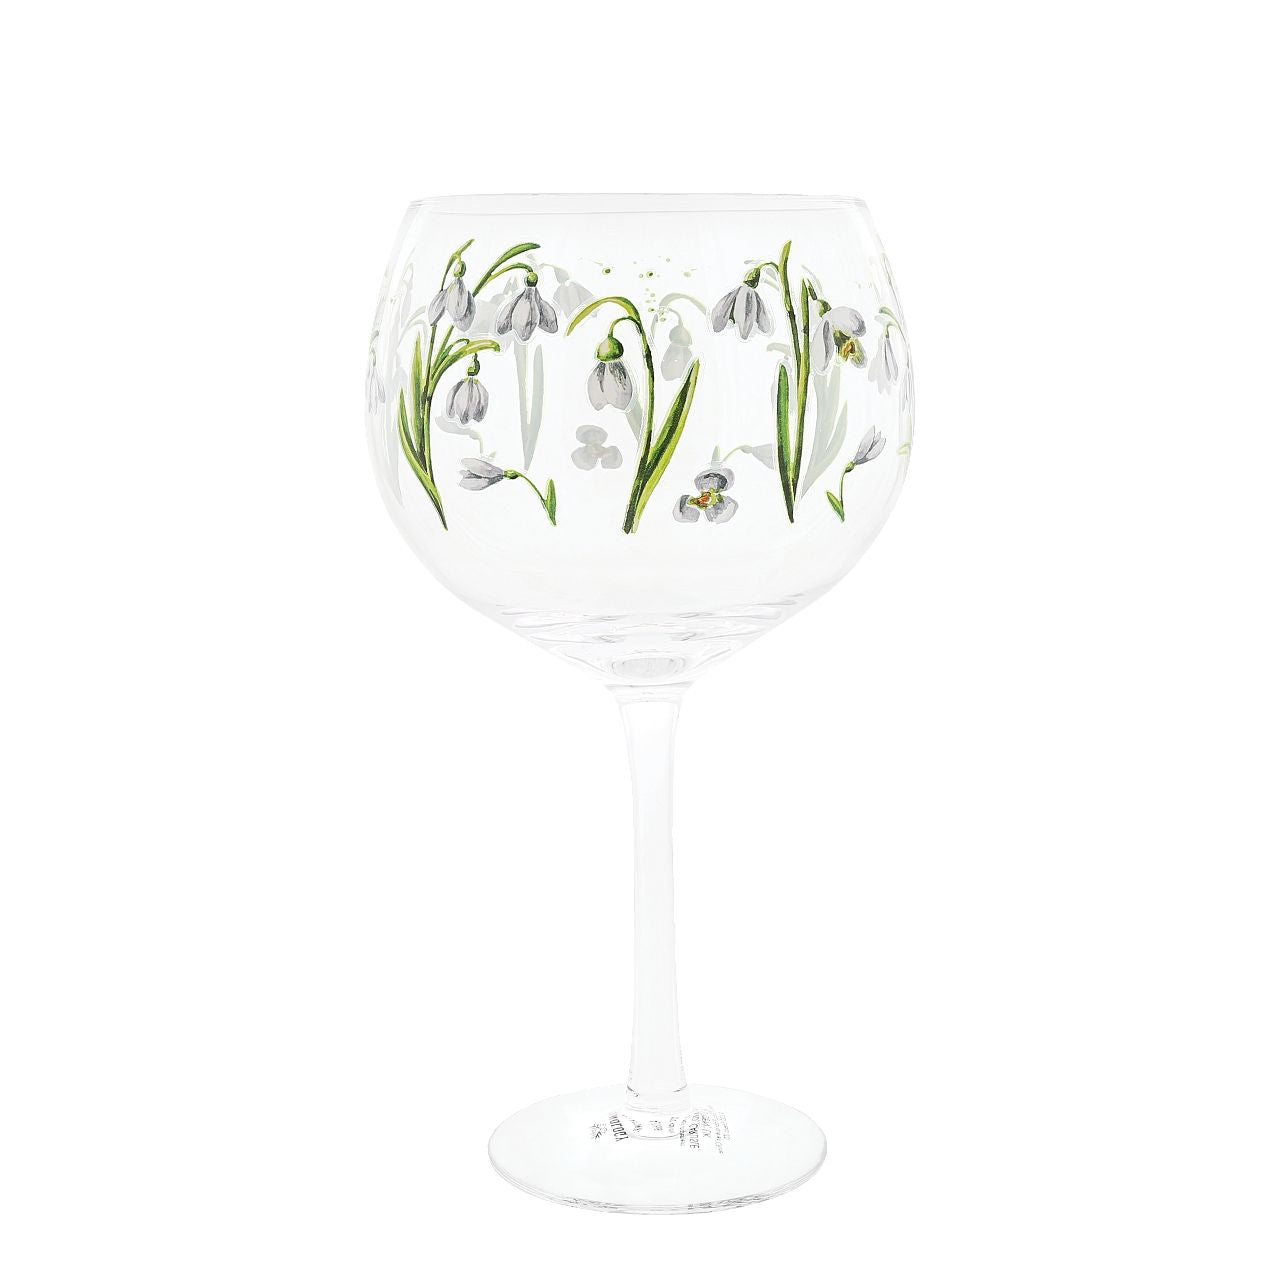 Snowdrops Copa Gin Glass  Symbolising purity, innocence and sympathy our Snowdrops Copa Gin glass adds elegance and class to your favourite Christmas drink to enjoy all year round. A great gift for someone who has recently lost a loved one, or show a friend how pure your friendship is this Christmas.